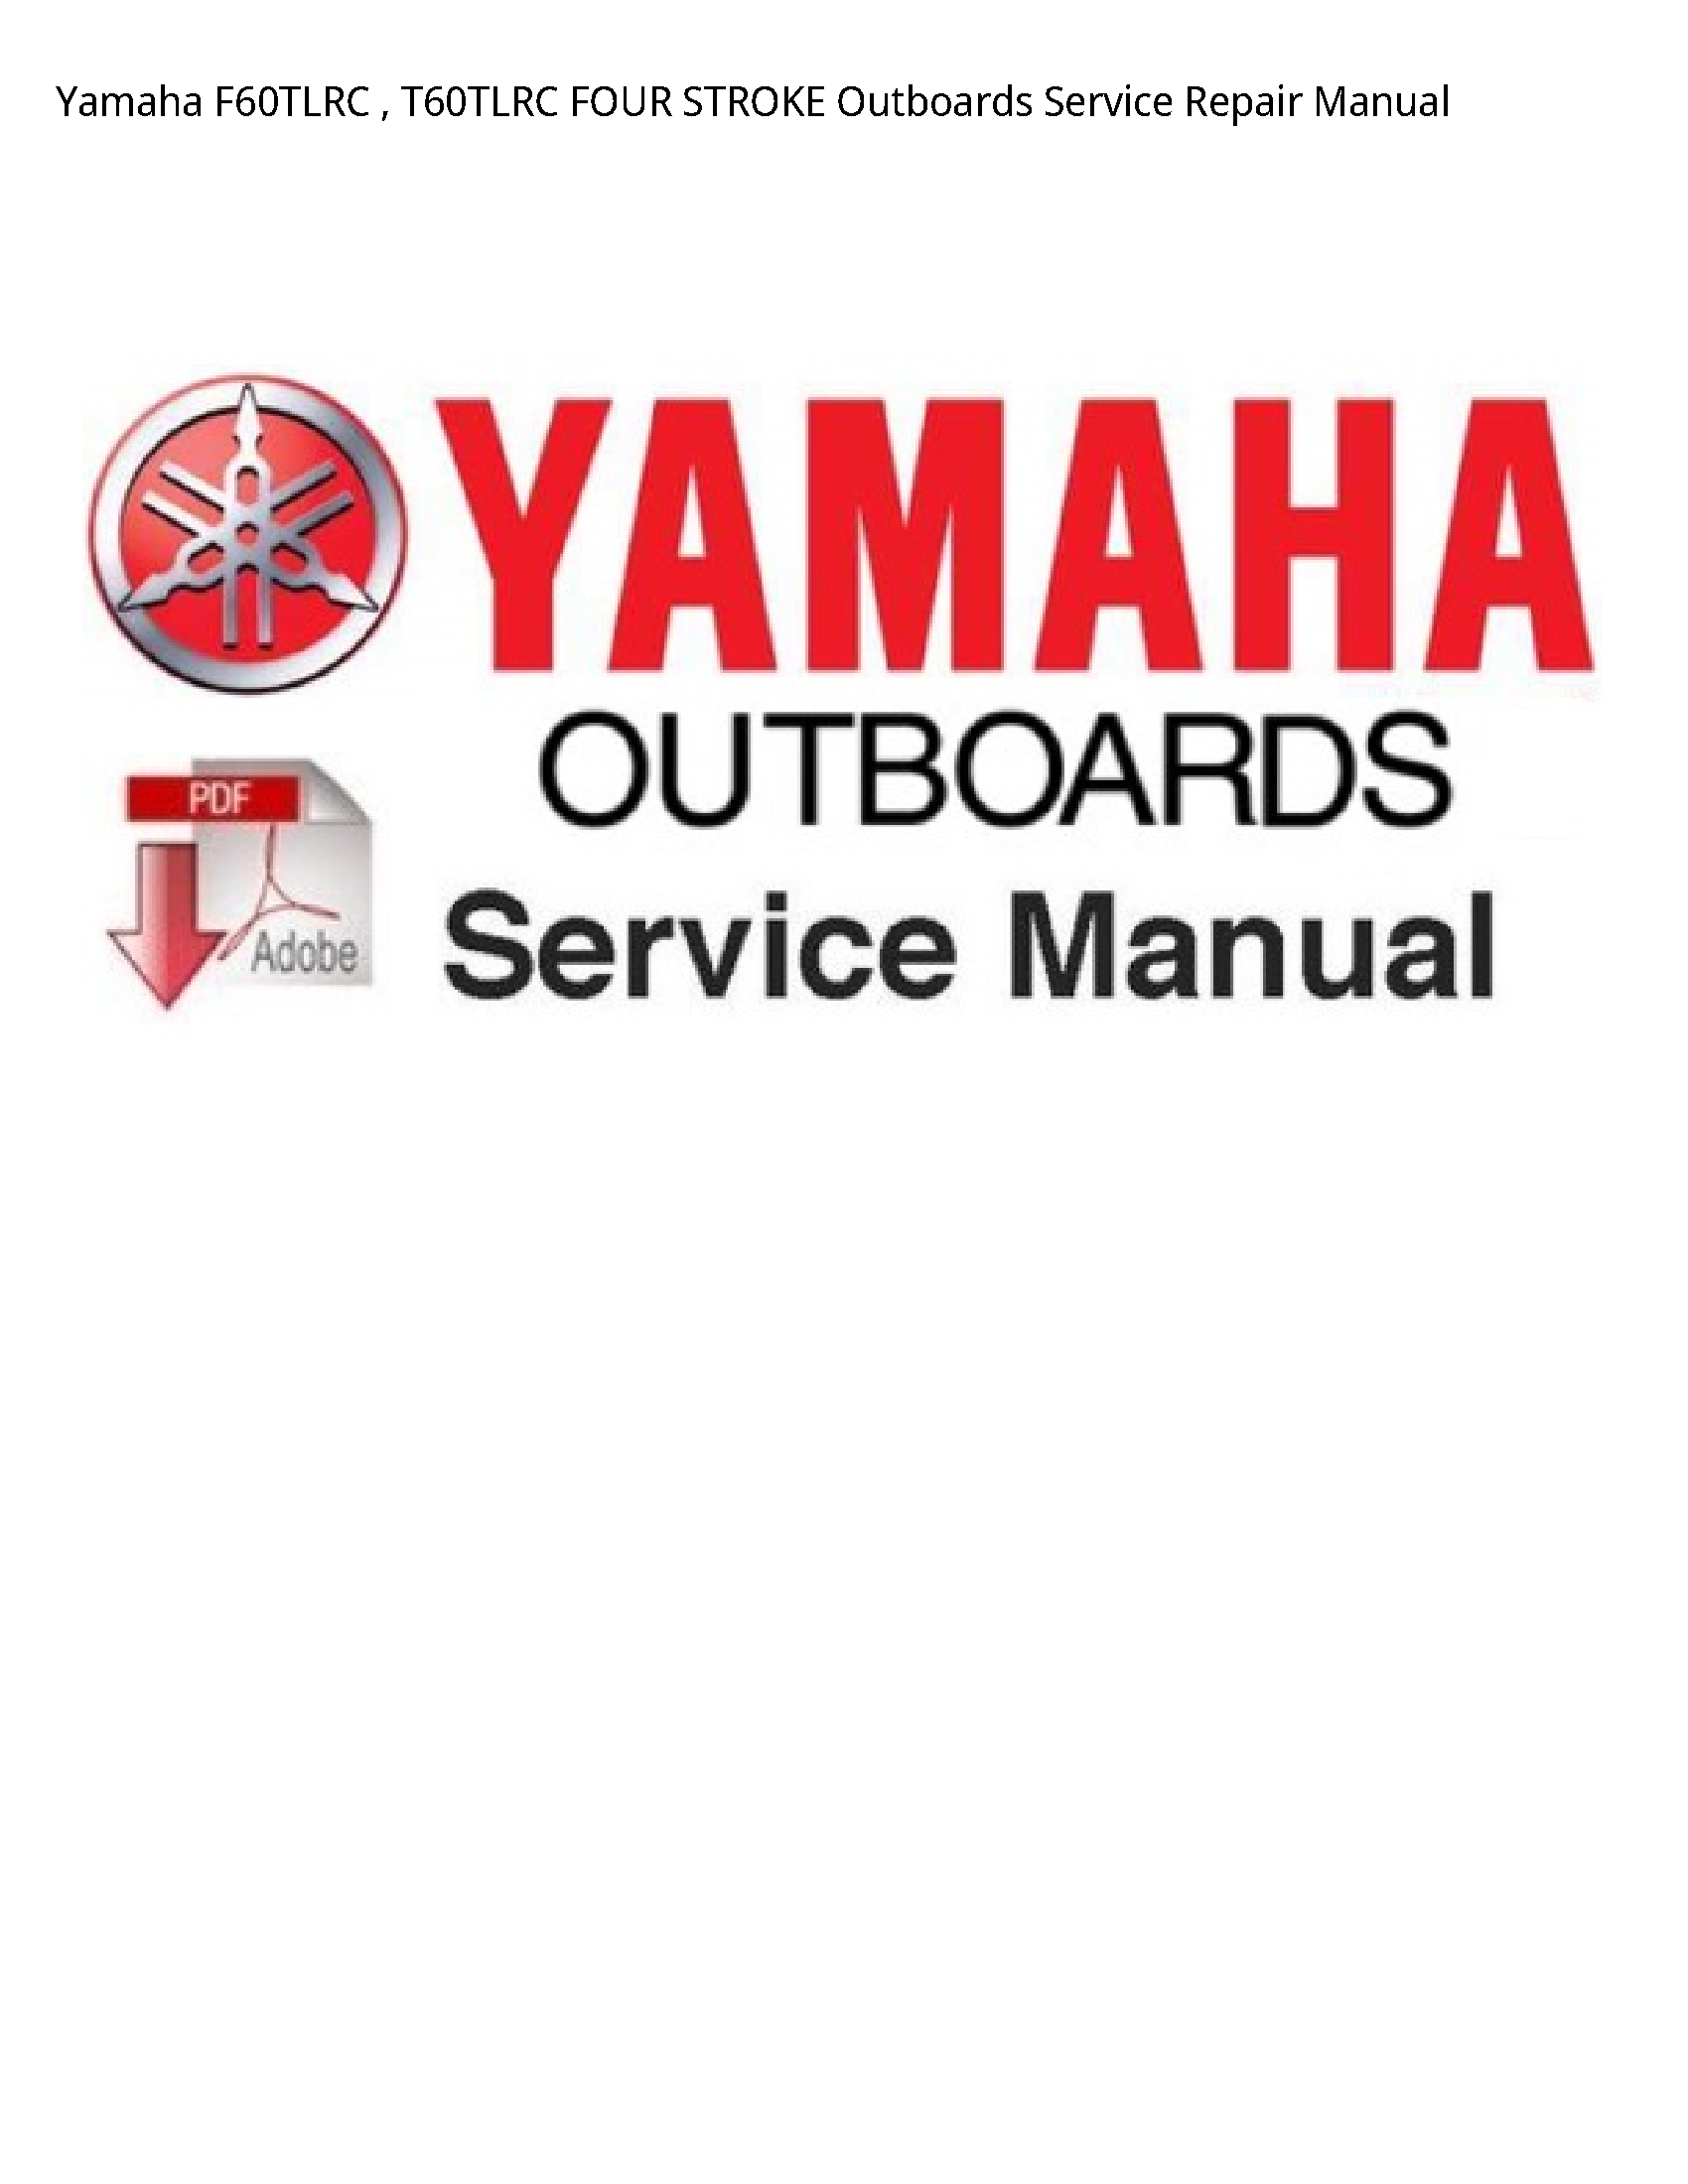 Yamaha F60TLRC FOUR STROKE Outboards manual